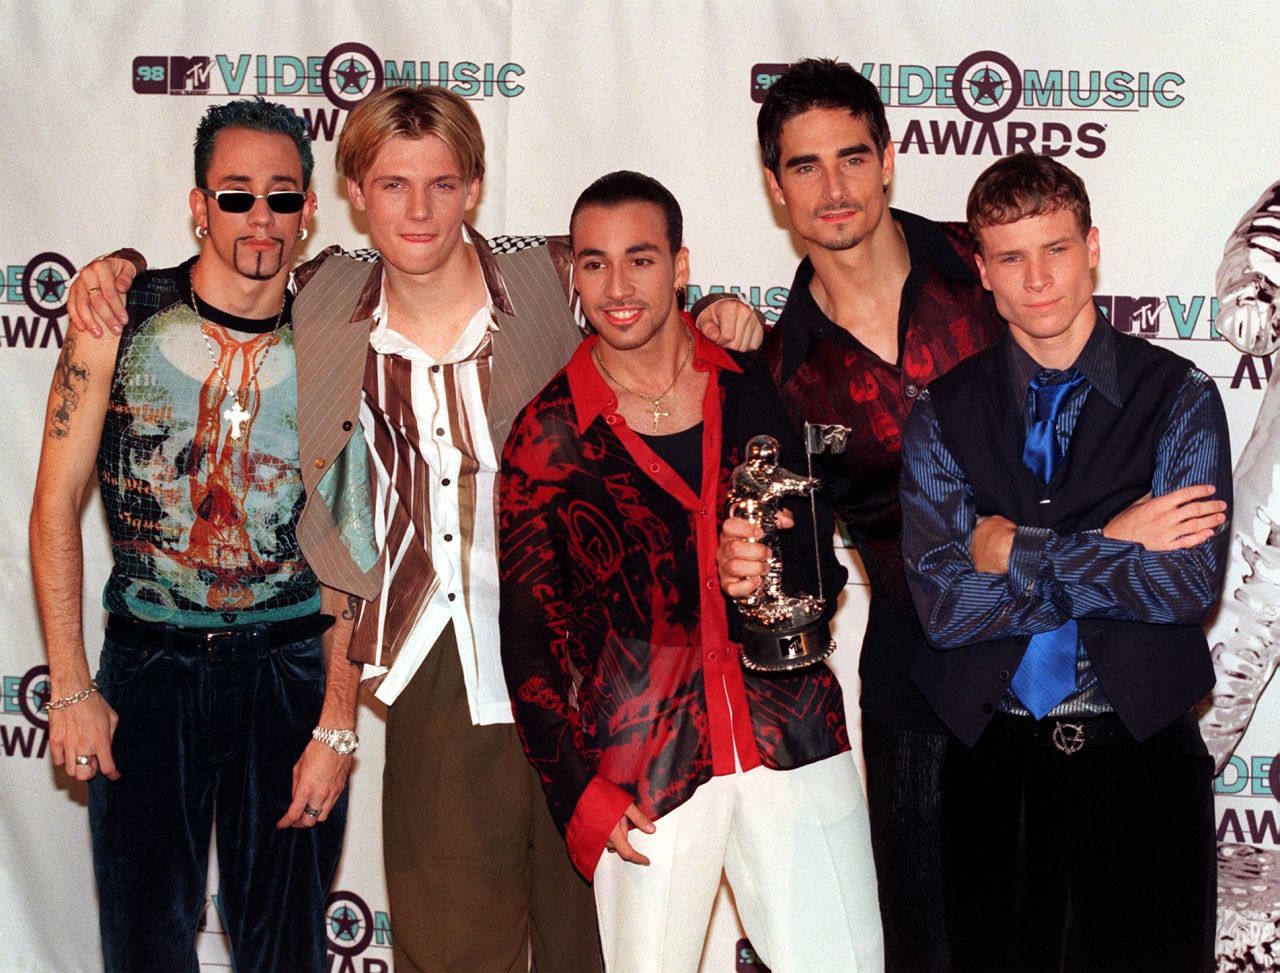 The Backstreet Boys -- <a href="http://marquee.blogs.cnn.com/2010/11/22/backstreet-boys-and-nkotb-recording-a-single-together/?iref=allsearch" target="_blank">who are back, by the way</a> -- won the devotion of scores of fans with sweet songs like "Quit Playing Games (With My Heart)" and "As Long As You Love Me." From left: A.J. McLean, Nick Carter, Howie Dorough, Kevin Richardson and Brian Littrell at the MTV Video Music Awards in 1998.